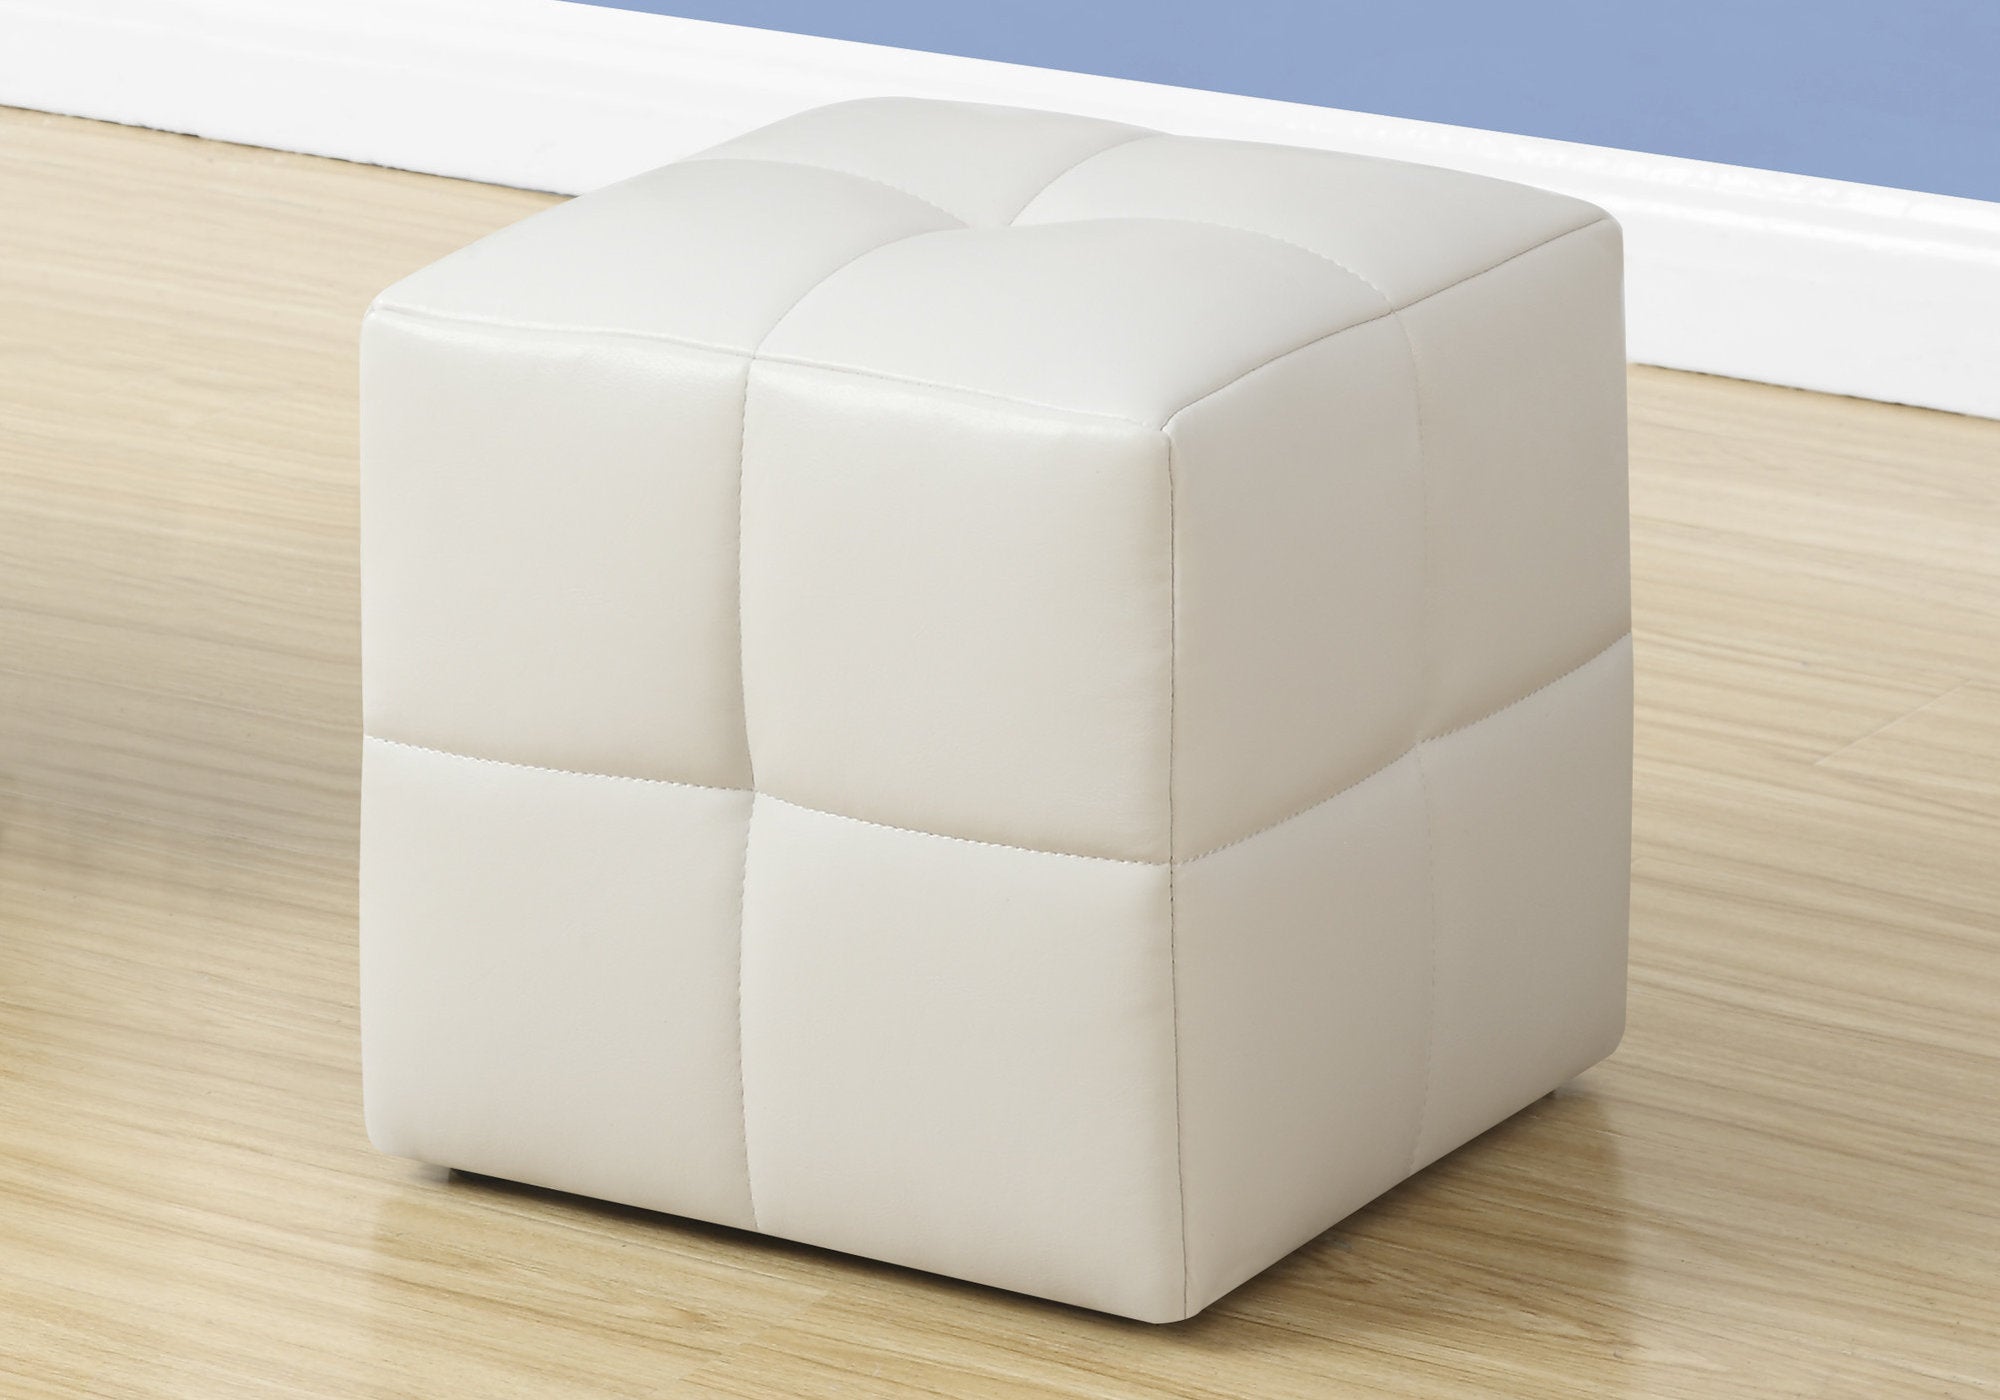 MN-958161    Ottoman, Pouf, Footrest, Foot Stool, Set Of 2, Leather Look, White, Contemporary, Modern